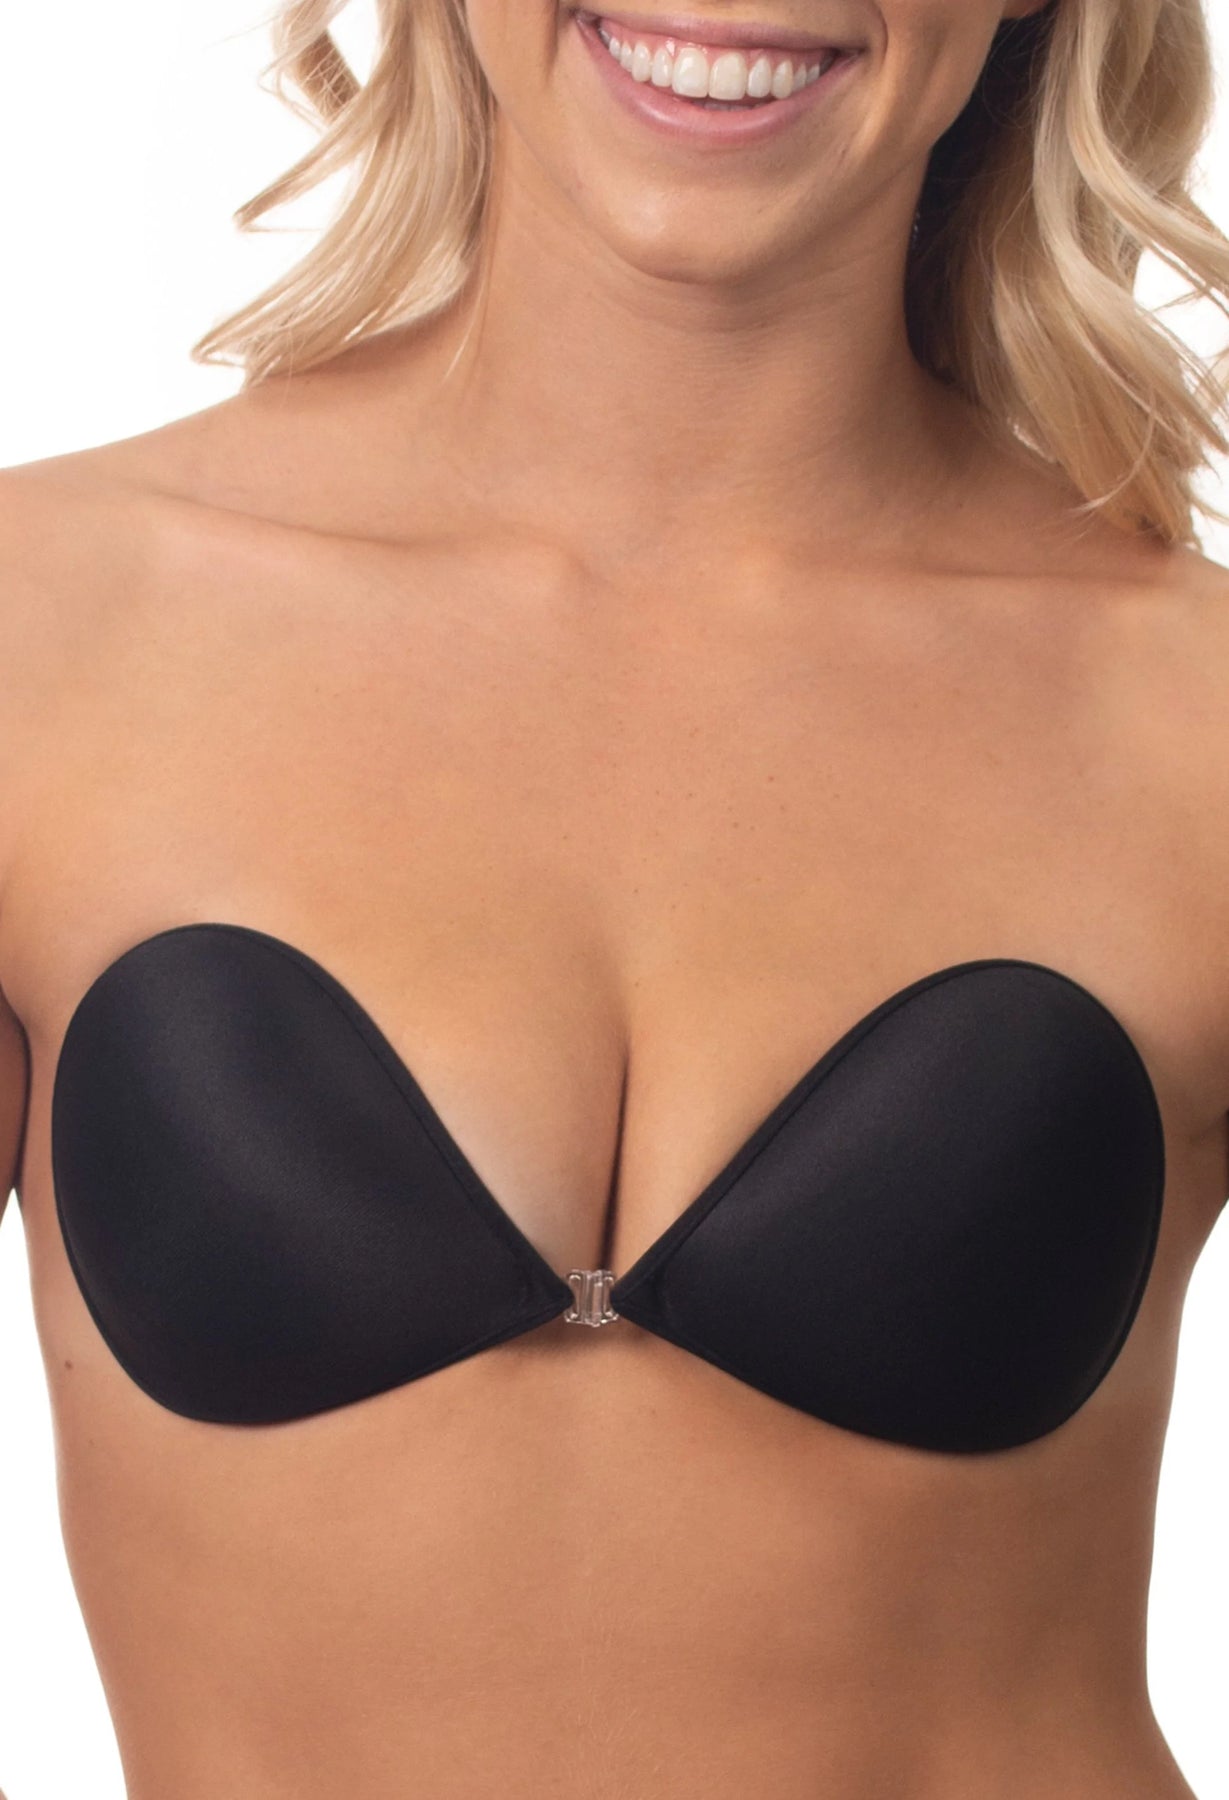 NEW EVE'S BACKLESS STRAPLESS BRA ADHESIVE BLACK ADHESIVE BRA SIZE C CUP  ONLY £7